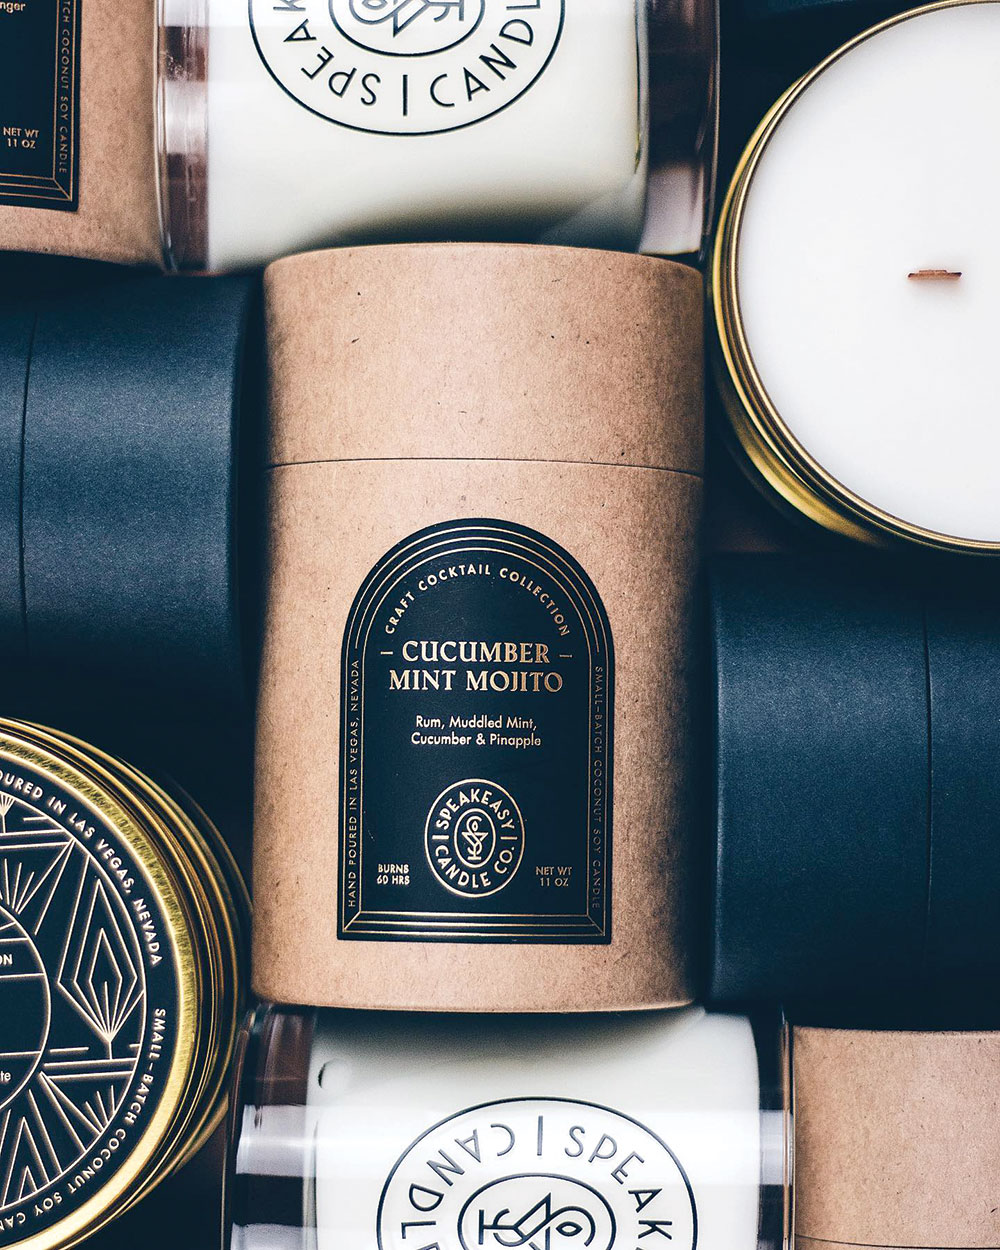 Speakeasy Candle Company in Las Vegas, image shows a close-up of candles in cardboard containers and also out by themselves. The center is in brown cardboard and indicates it is Cucumber Mint Mojito scented.